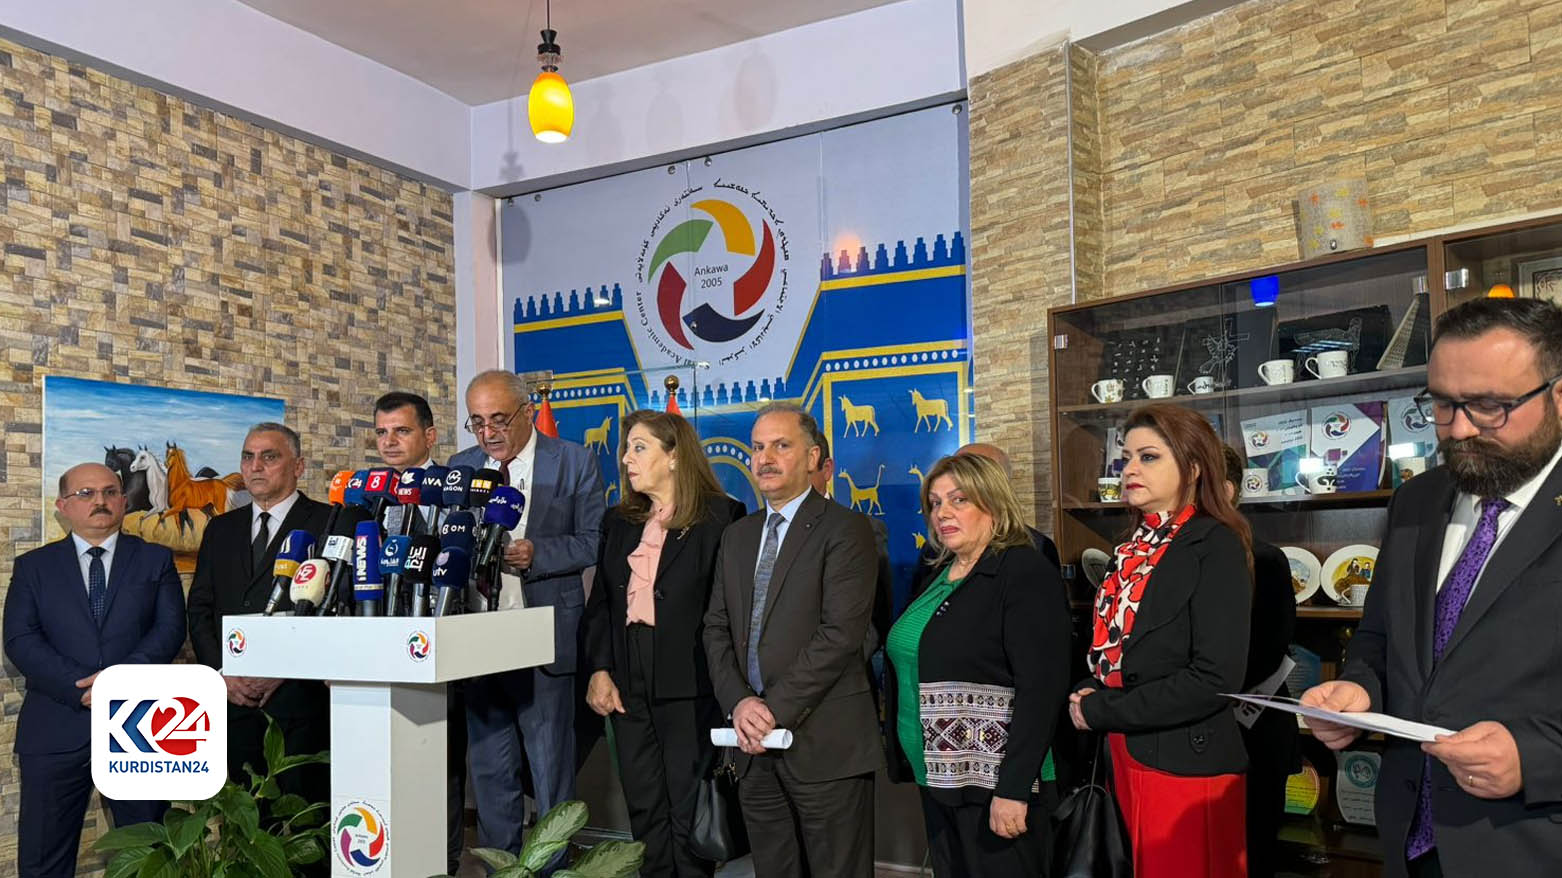 Christian Kurdish parties unite in decision to abstain citing constitutional concerns